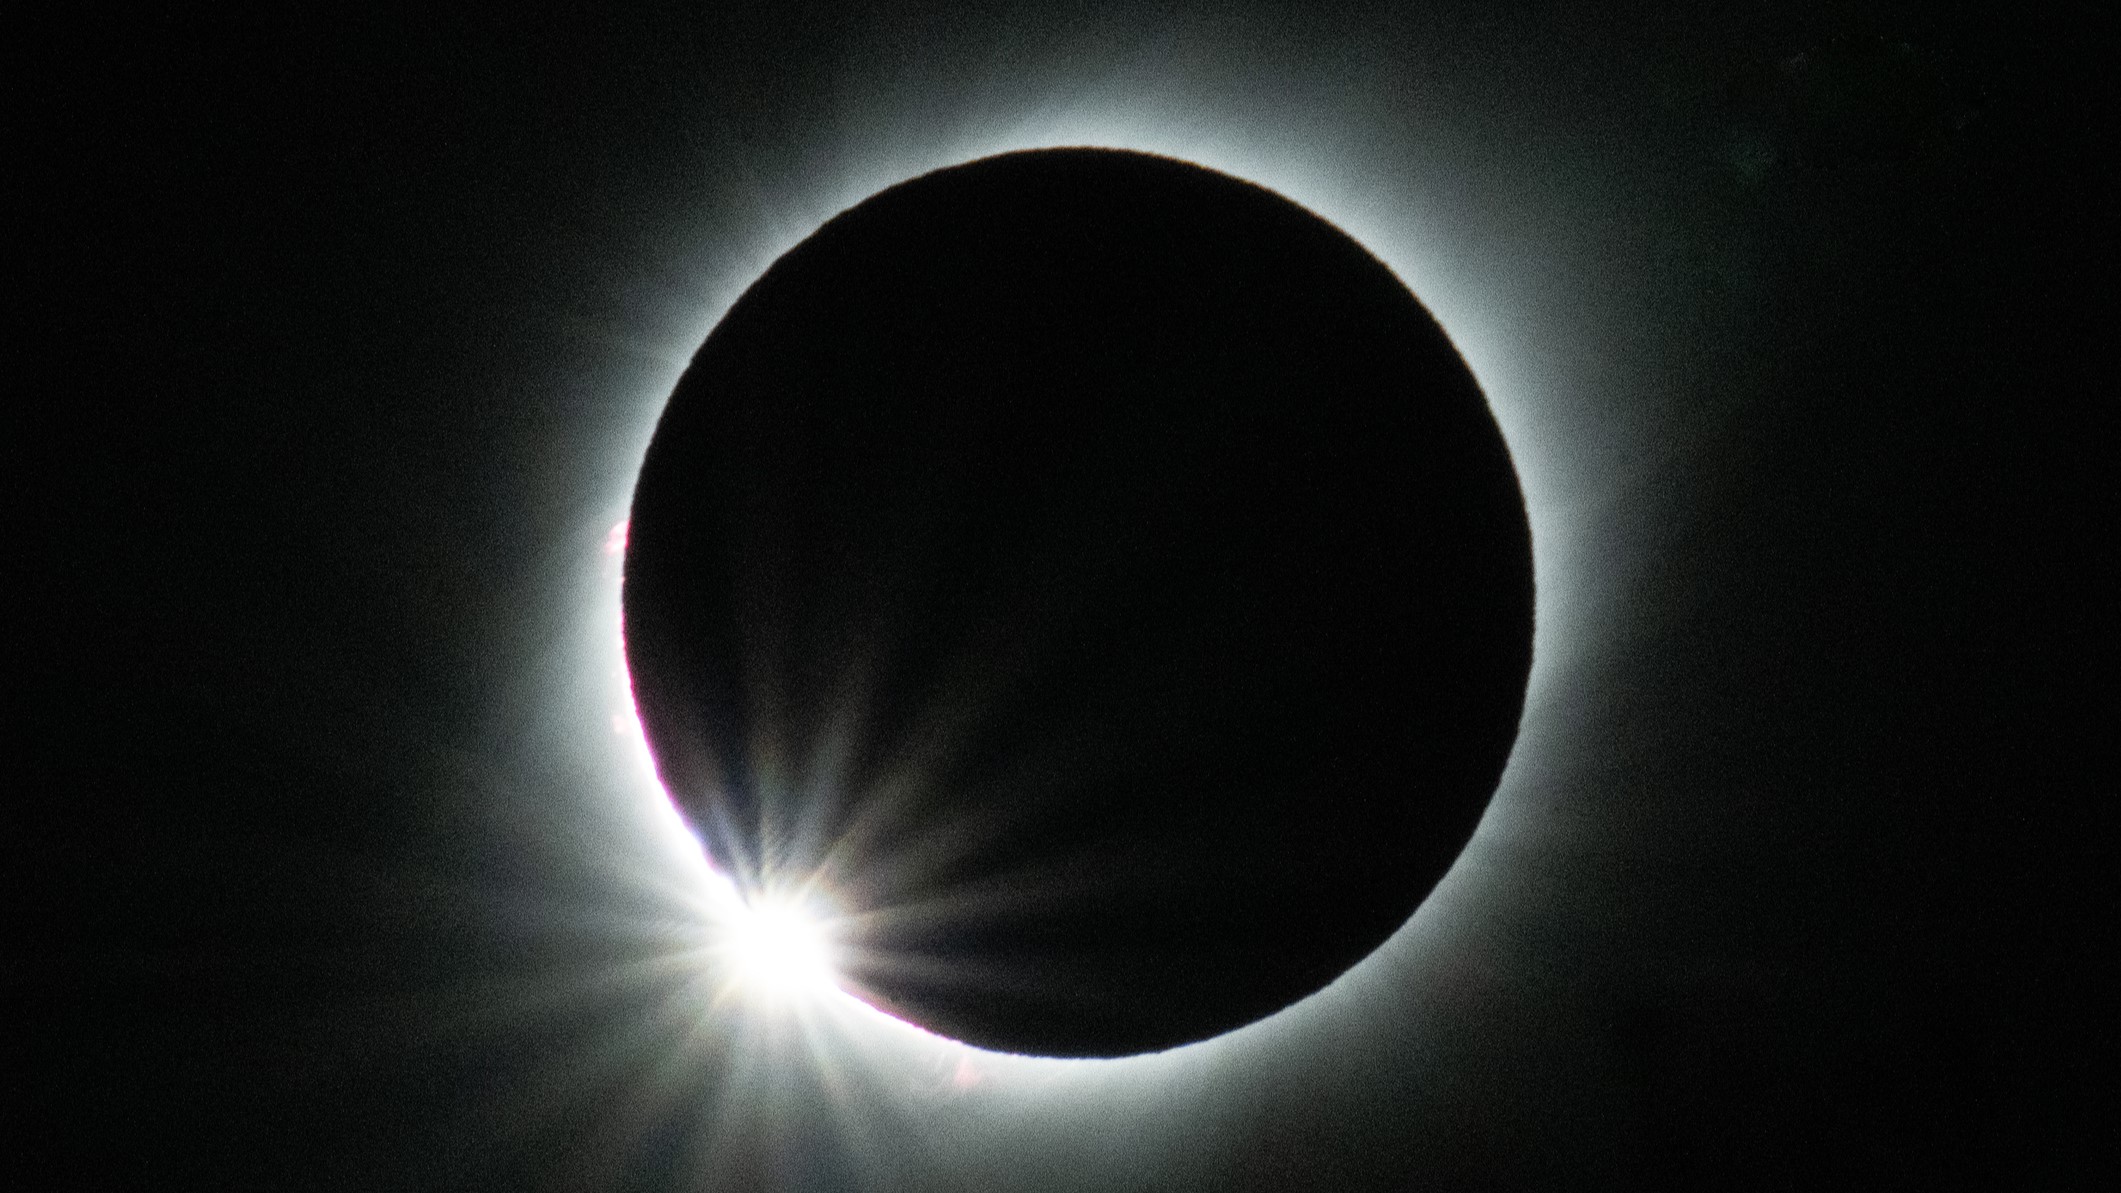 diamond ring effect during total solar eclipse, black circle surrounded by a hazy white light with a distinct bright region looking like a diamond ring